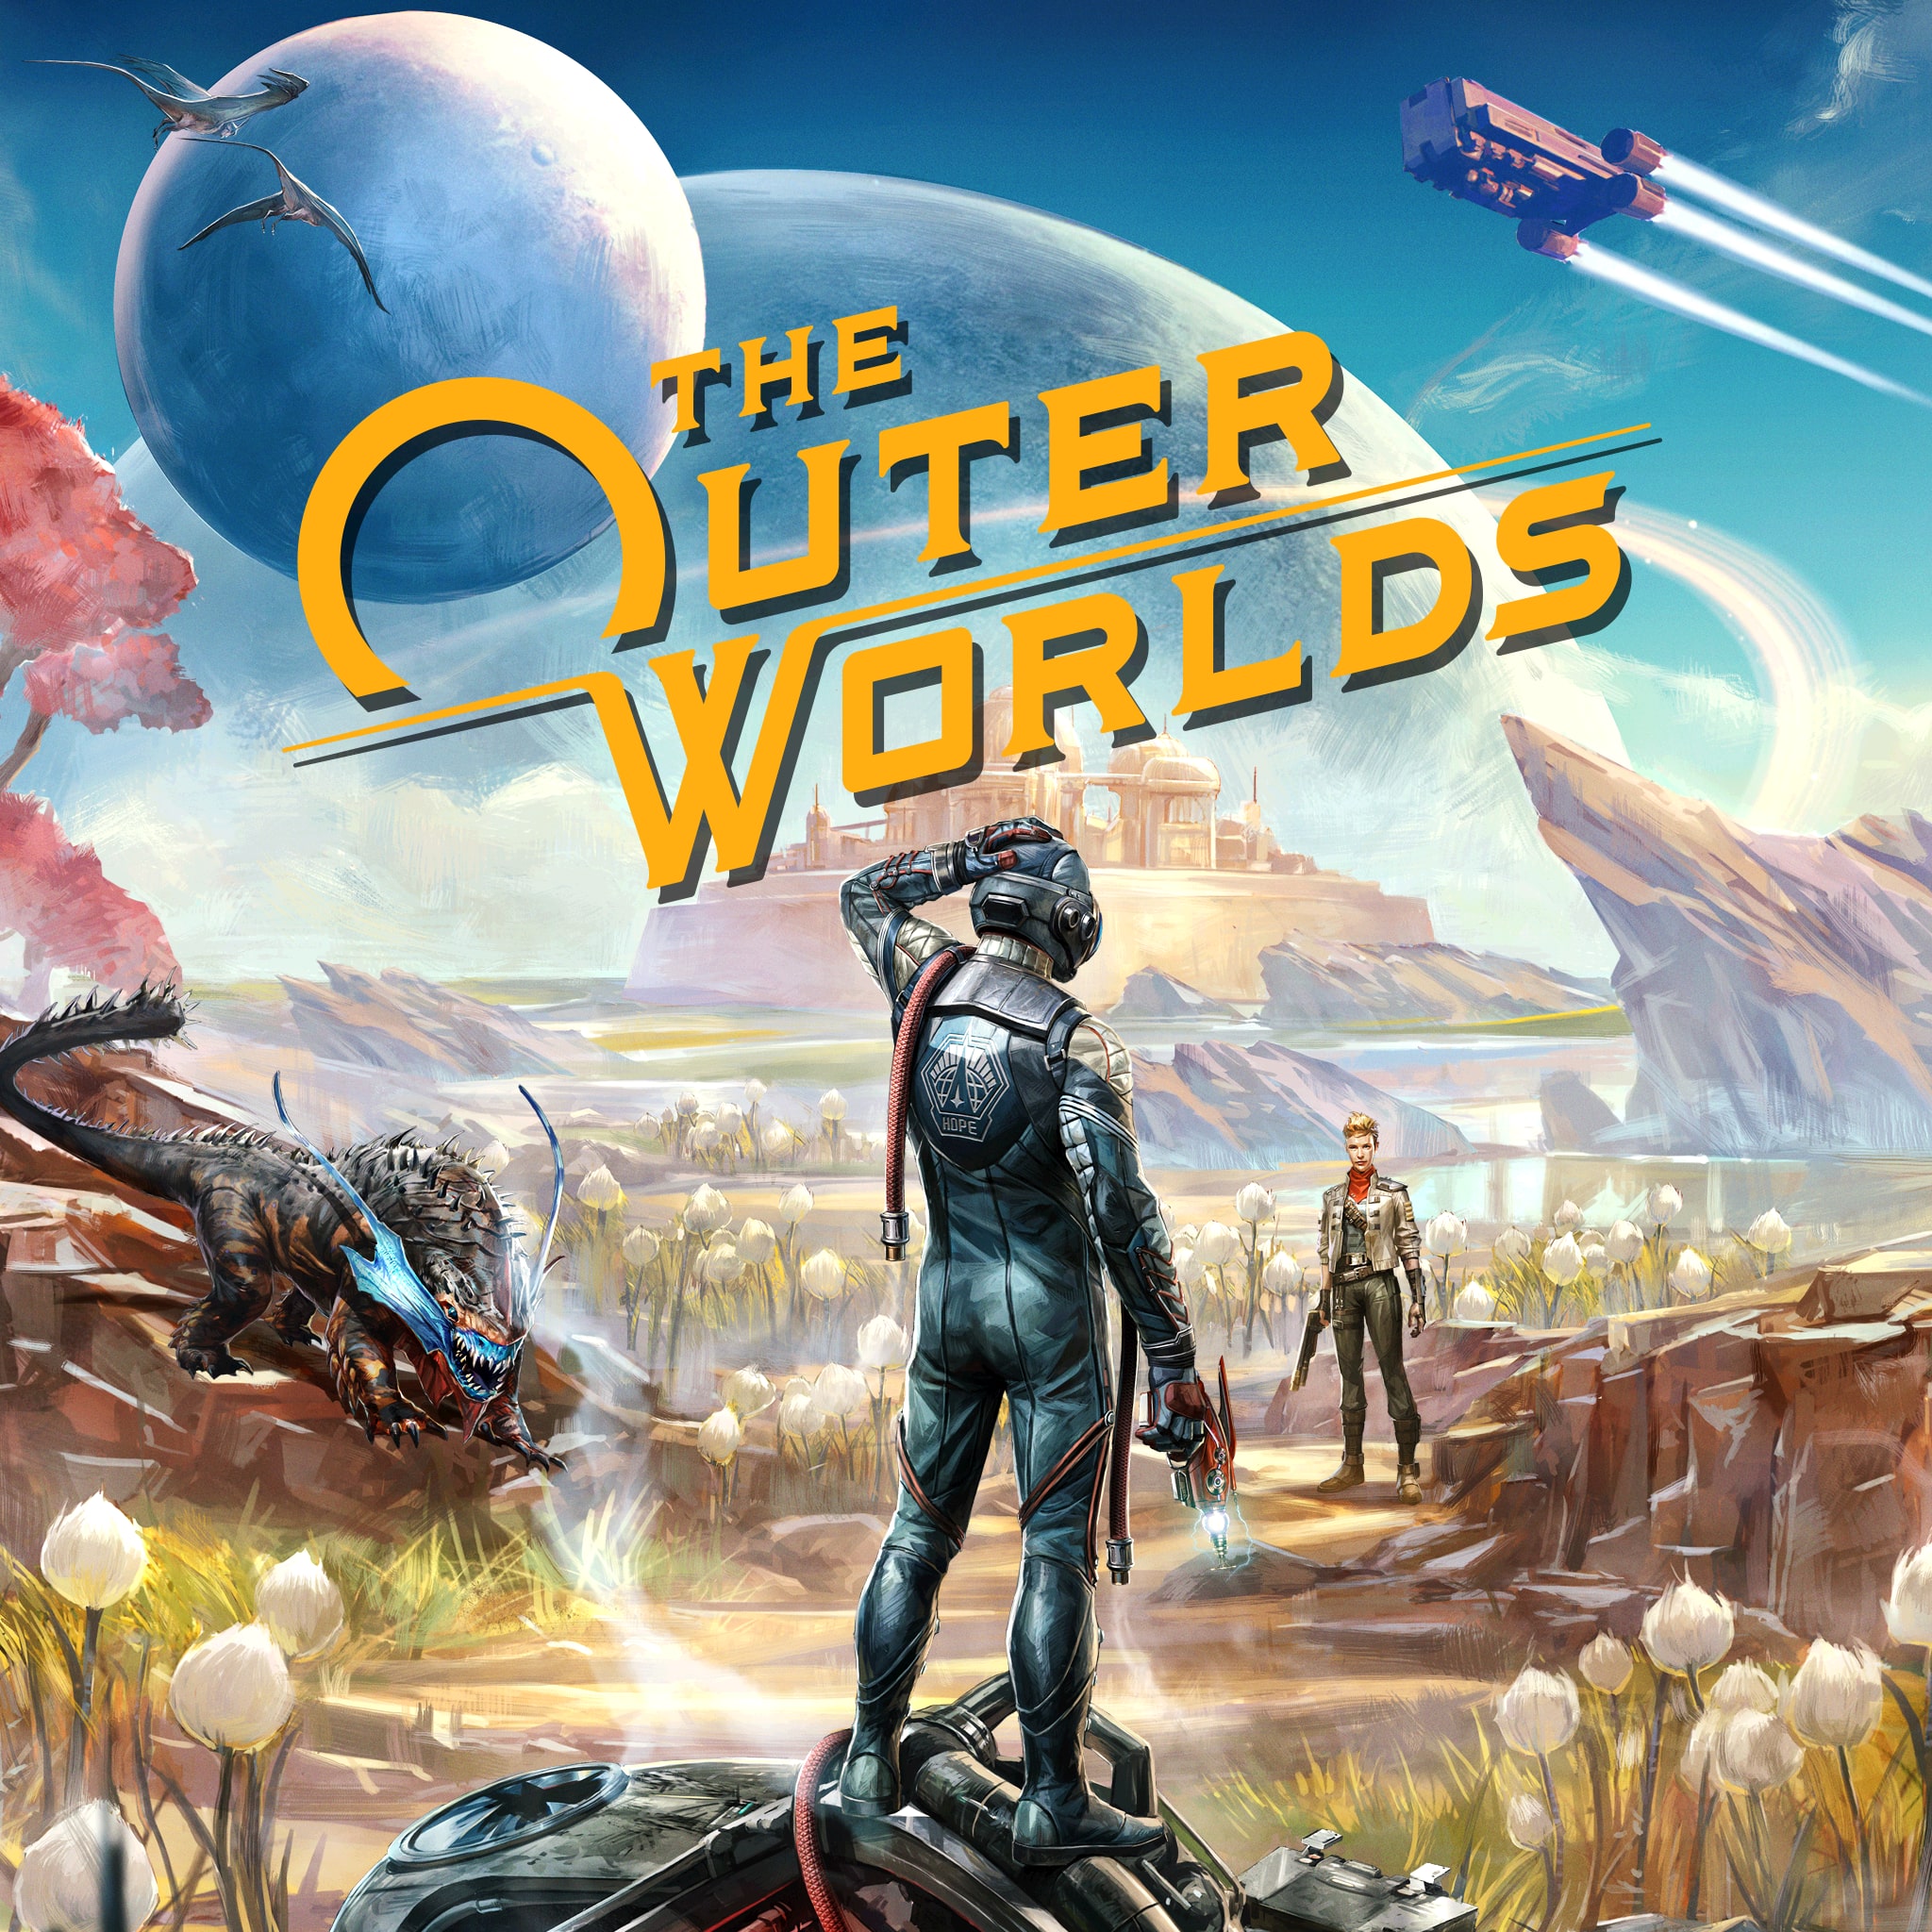 Inspection Mediterranean Sea regional The Outer Worlds - PS4 Games | PlayStation (US)